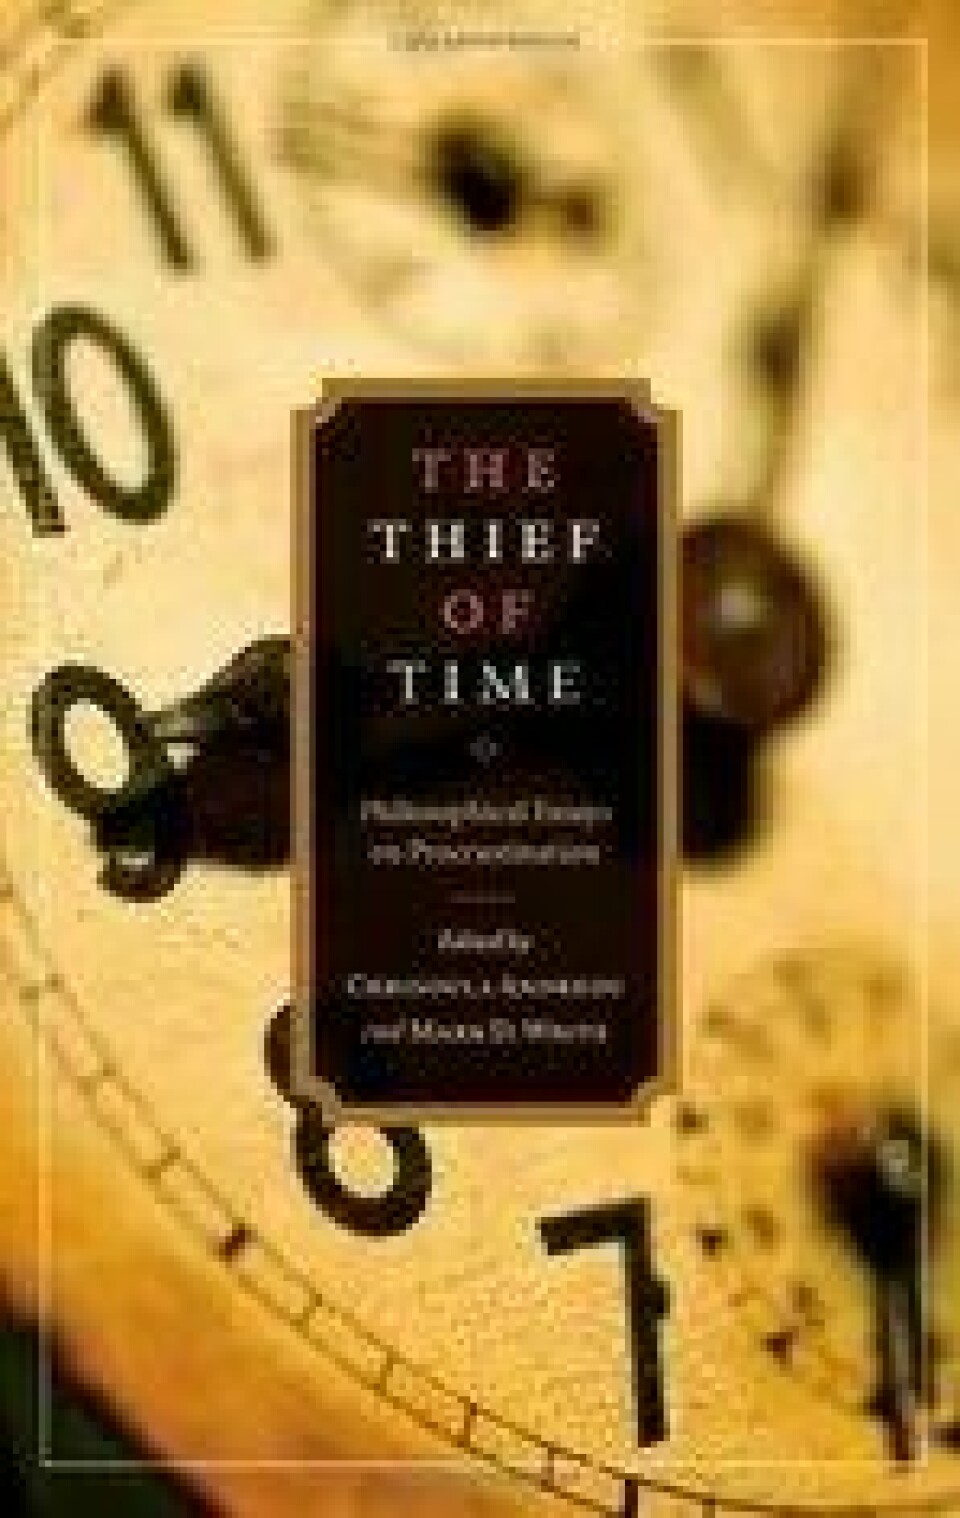 Chrisoula Andreou og Mark D. White (red.): The Thief of Time. Philosophical Essays on Procrastination (Oxford University Press, 2010)